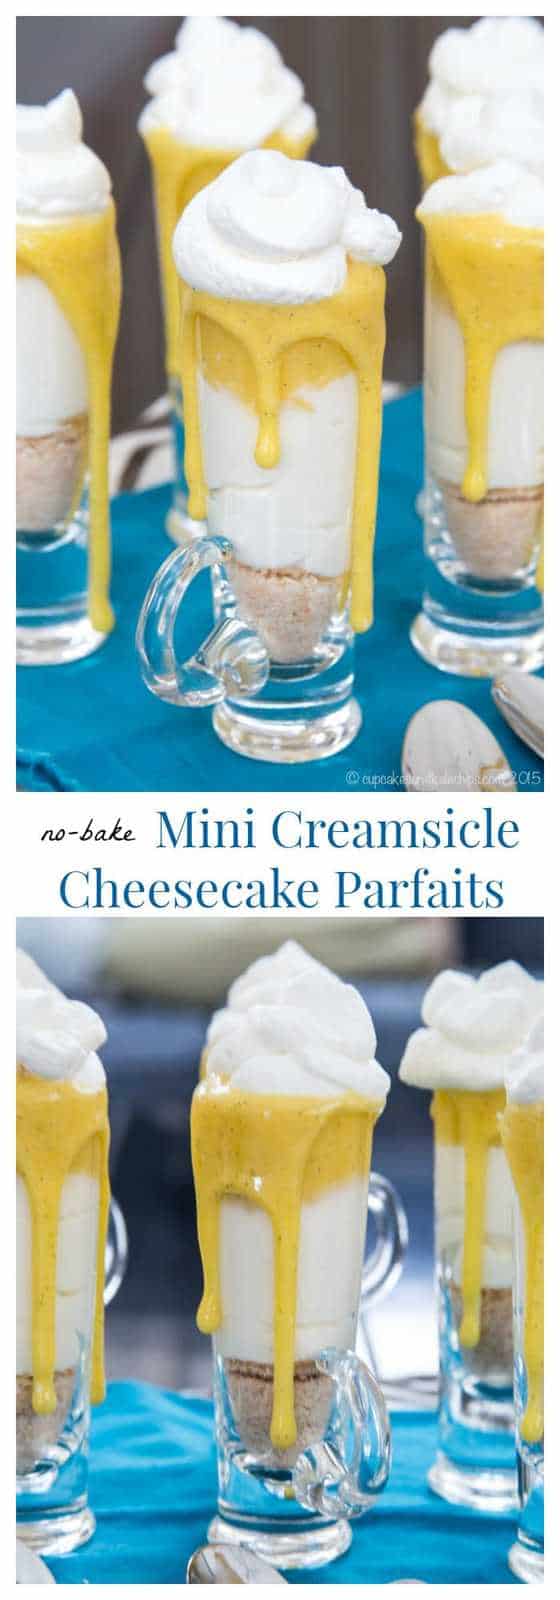 No-Bake Mini Creamsicle Cheesecake Parfaits are simple miniature desserts perfect for any spring holiday or party with a creamy cheesecake layer and the burst of citrus. Easy to make gluten free, too! | cupcakesandkalechips.com